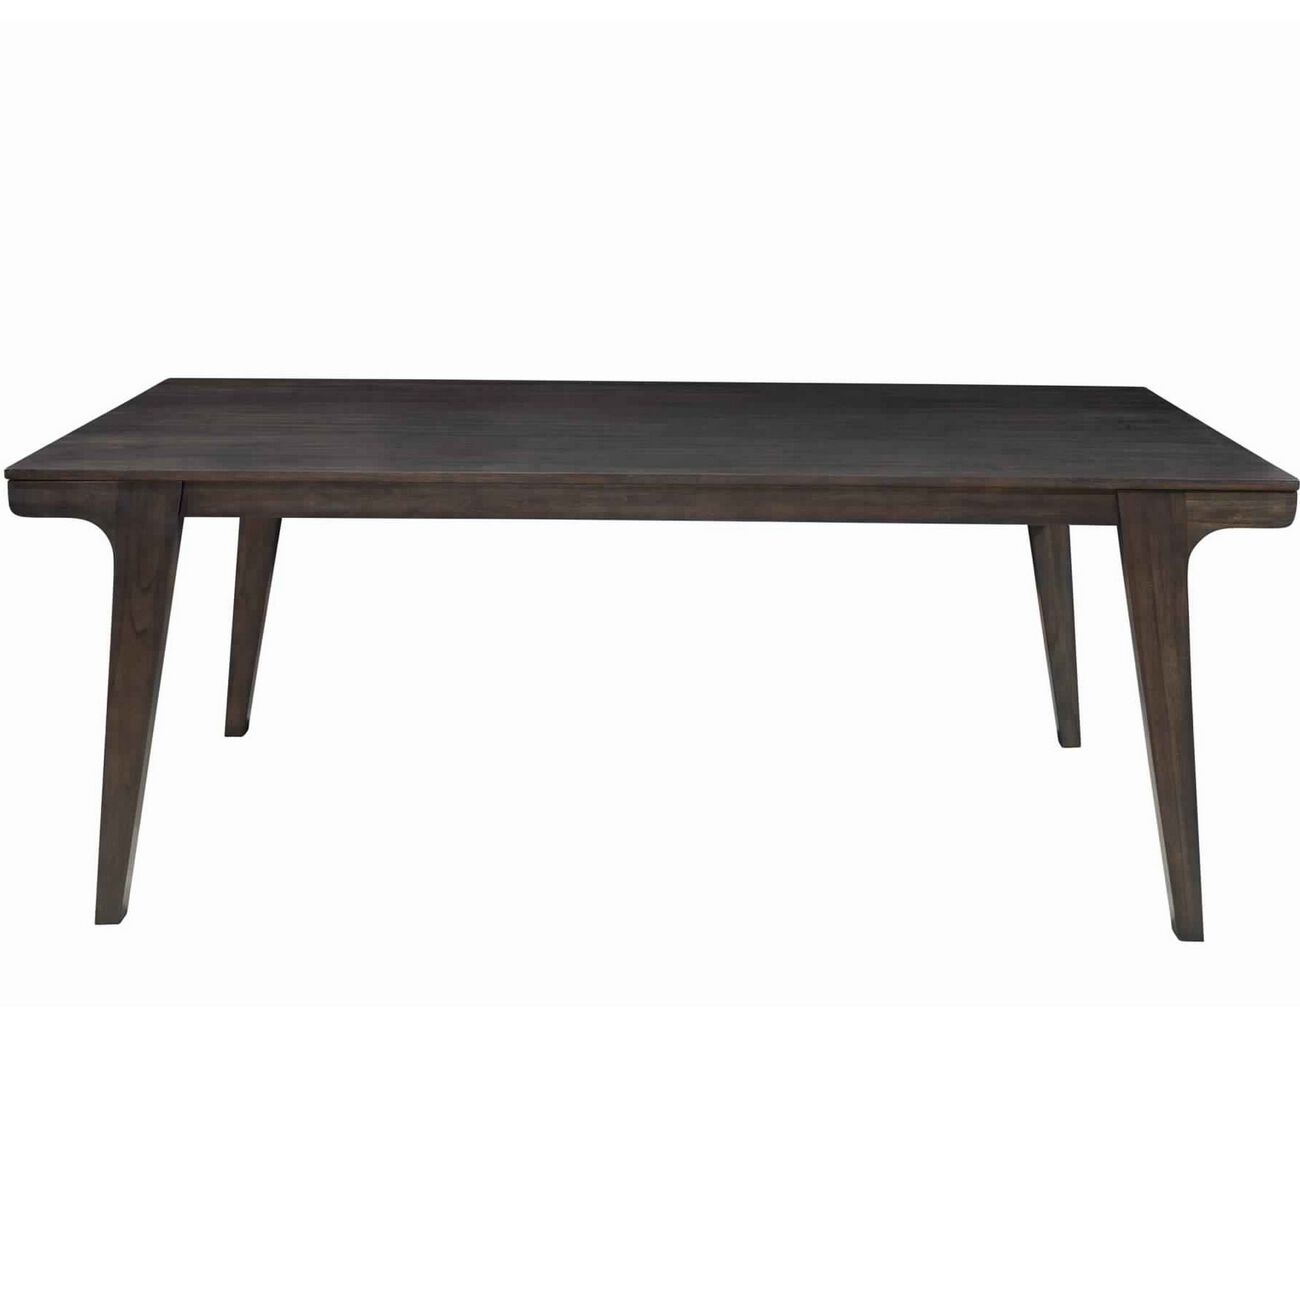 Rectangular Dining Table with Angled Legs and Grain Details, Brown